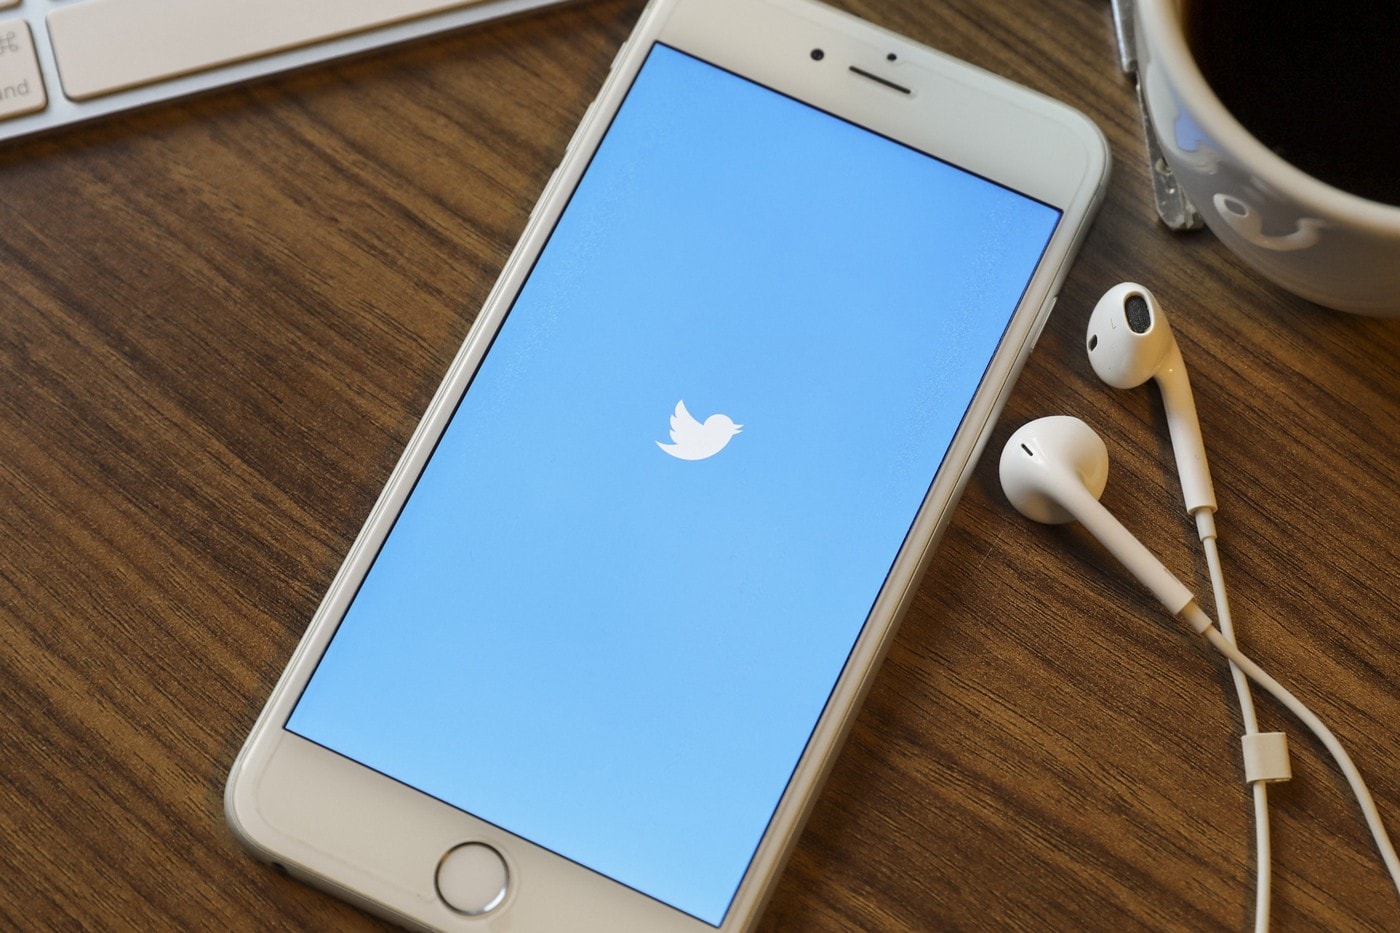 Twitter Launches "Stories" Feature Named "Fleets"